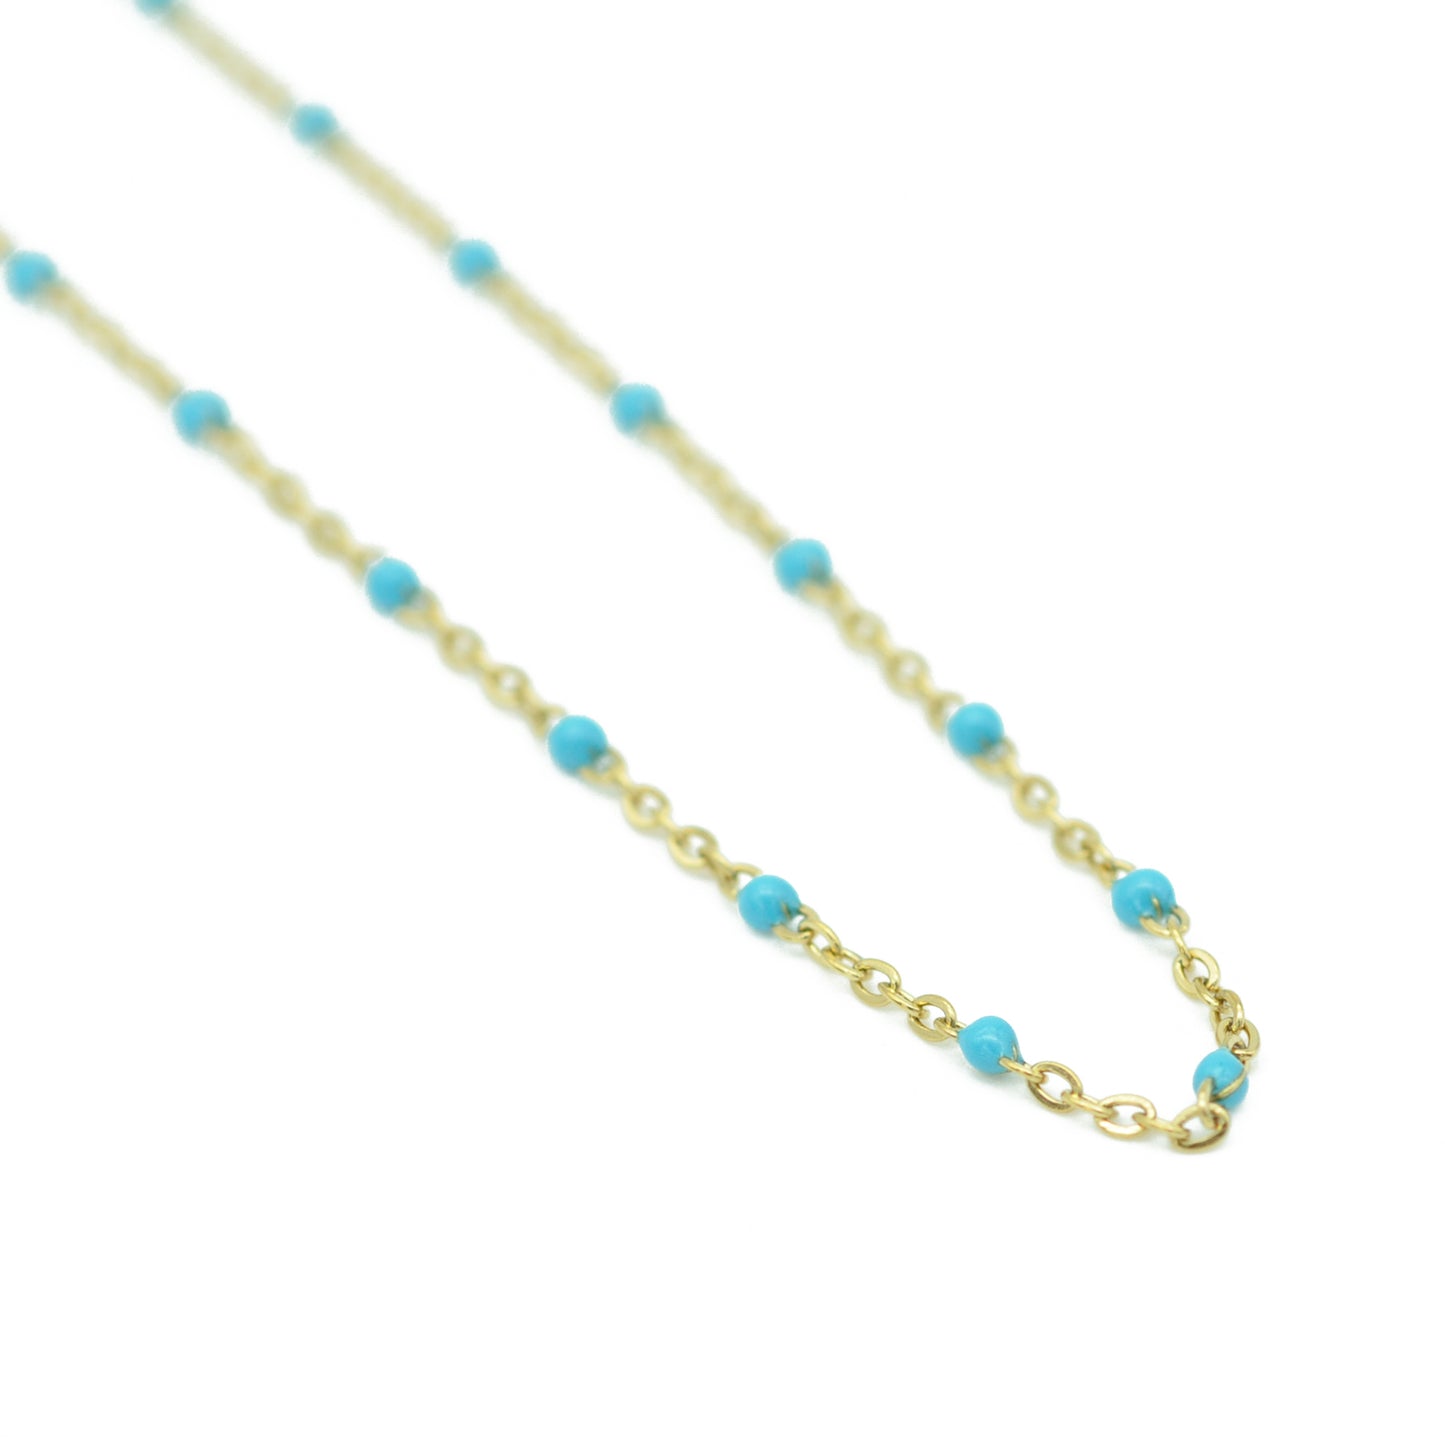 Stainless steel chain with beads / turquoise enamelled / gold plated / 45 cm